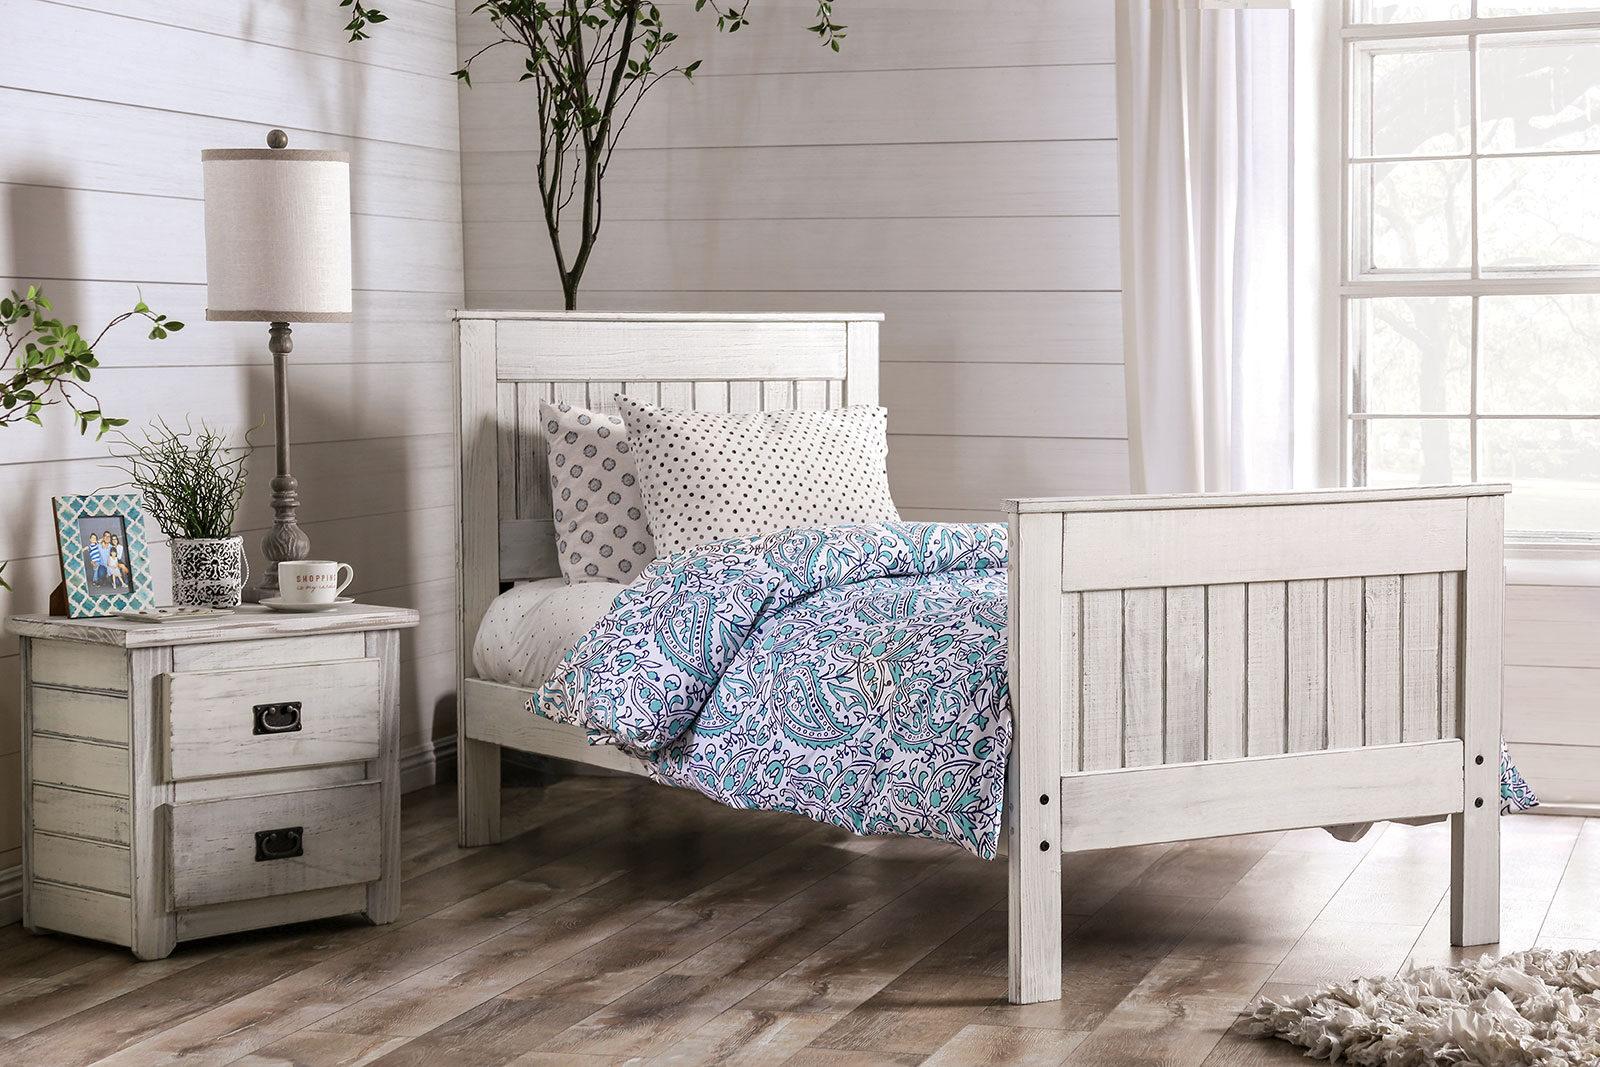 Rustic Panel Bed AM7973WH-F Rockwall AM7973WH-F in White 